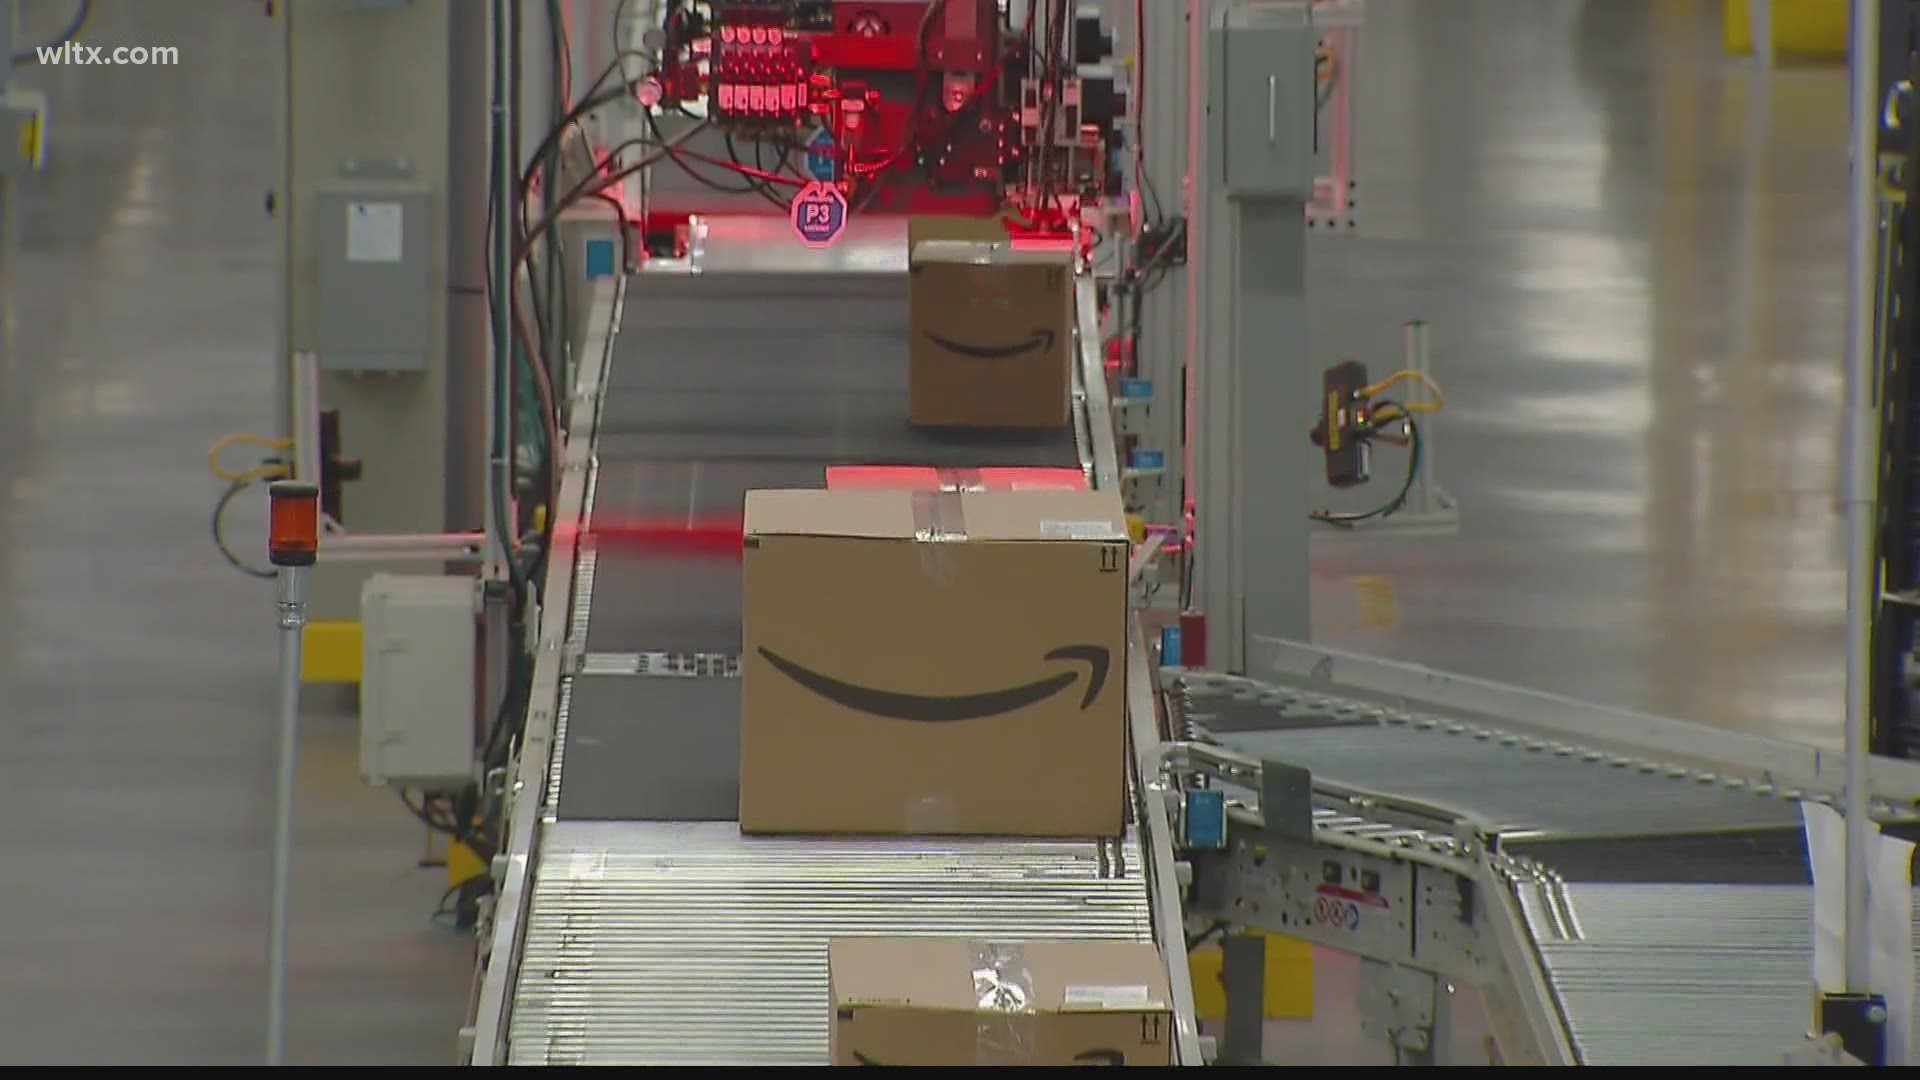 Amazon says more than 1,300 seasonal positions are available in South Carolina.